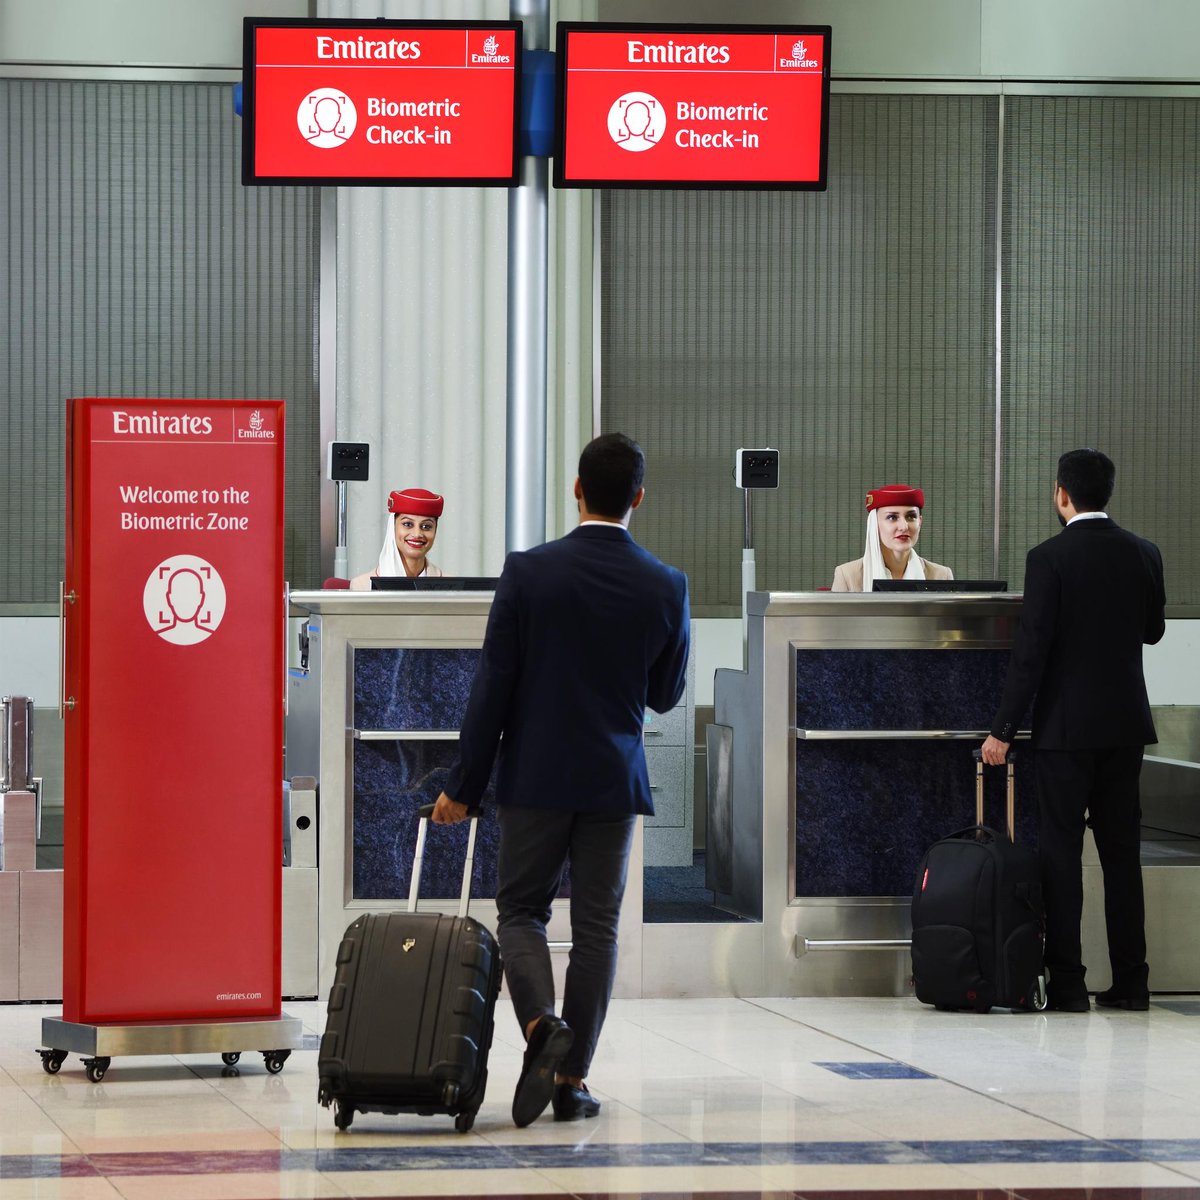 Emirates Airways introduces the new iris and facial recognition technology for its passengers